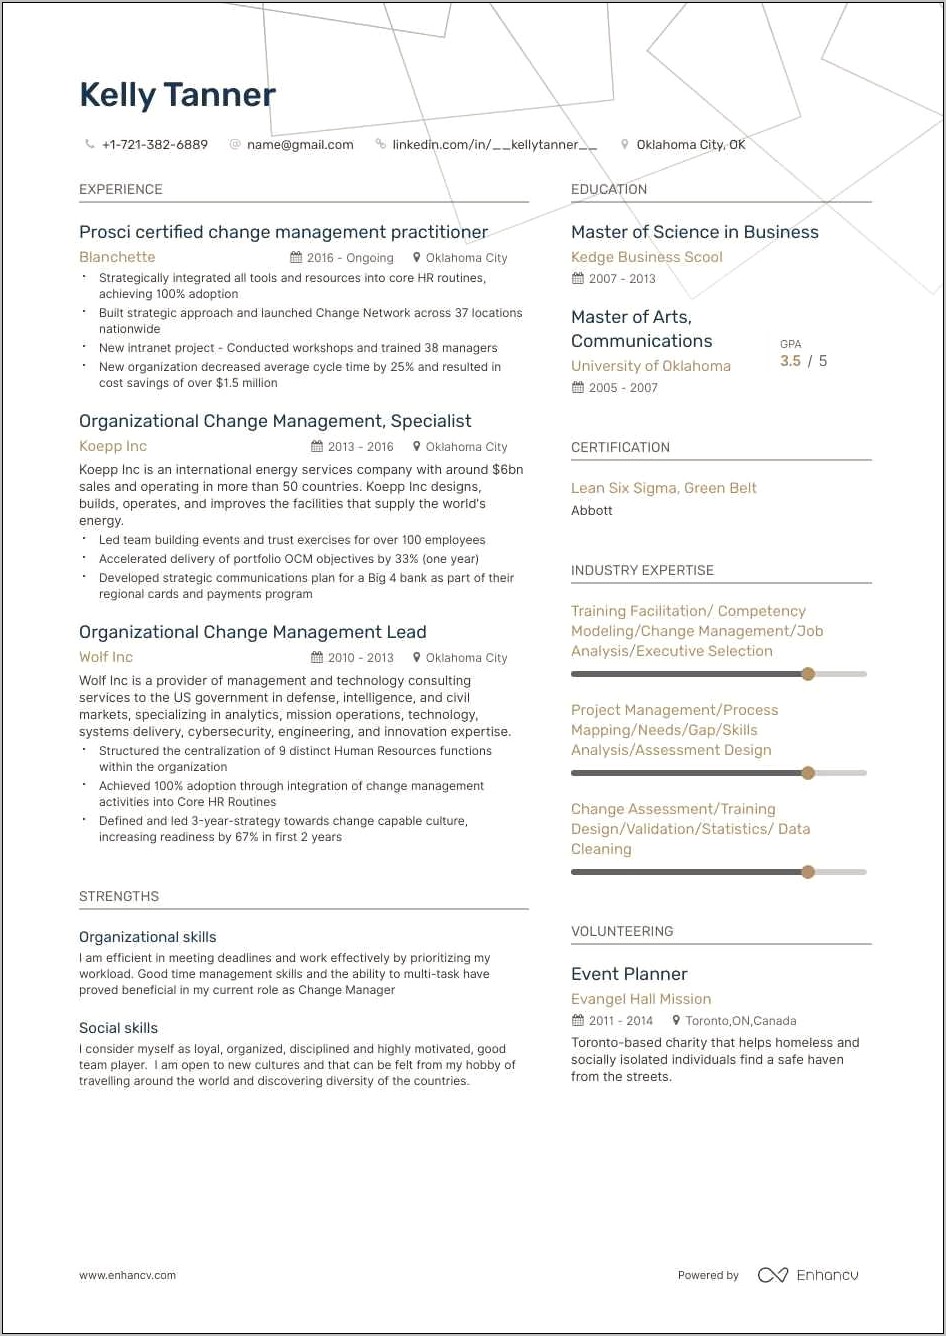 Examples Of Data Management For A Resume